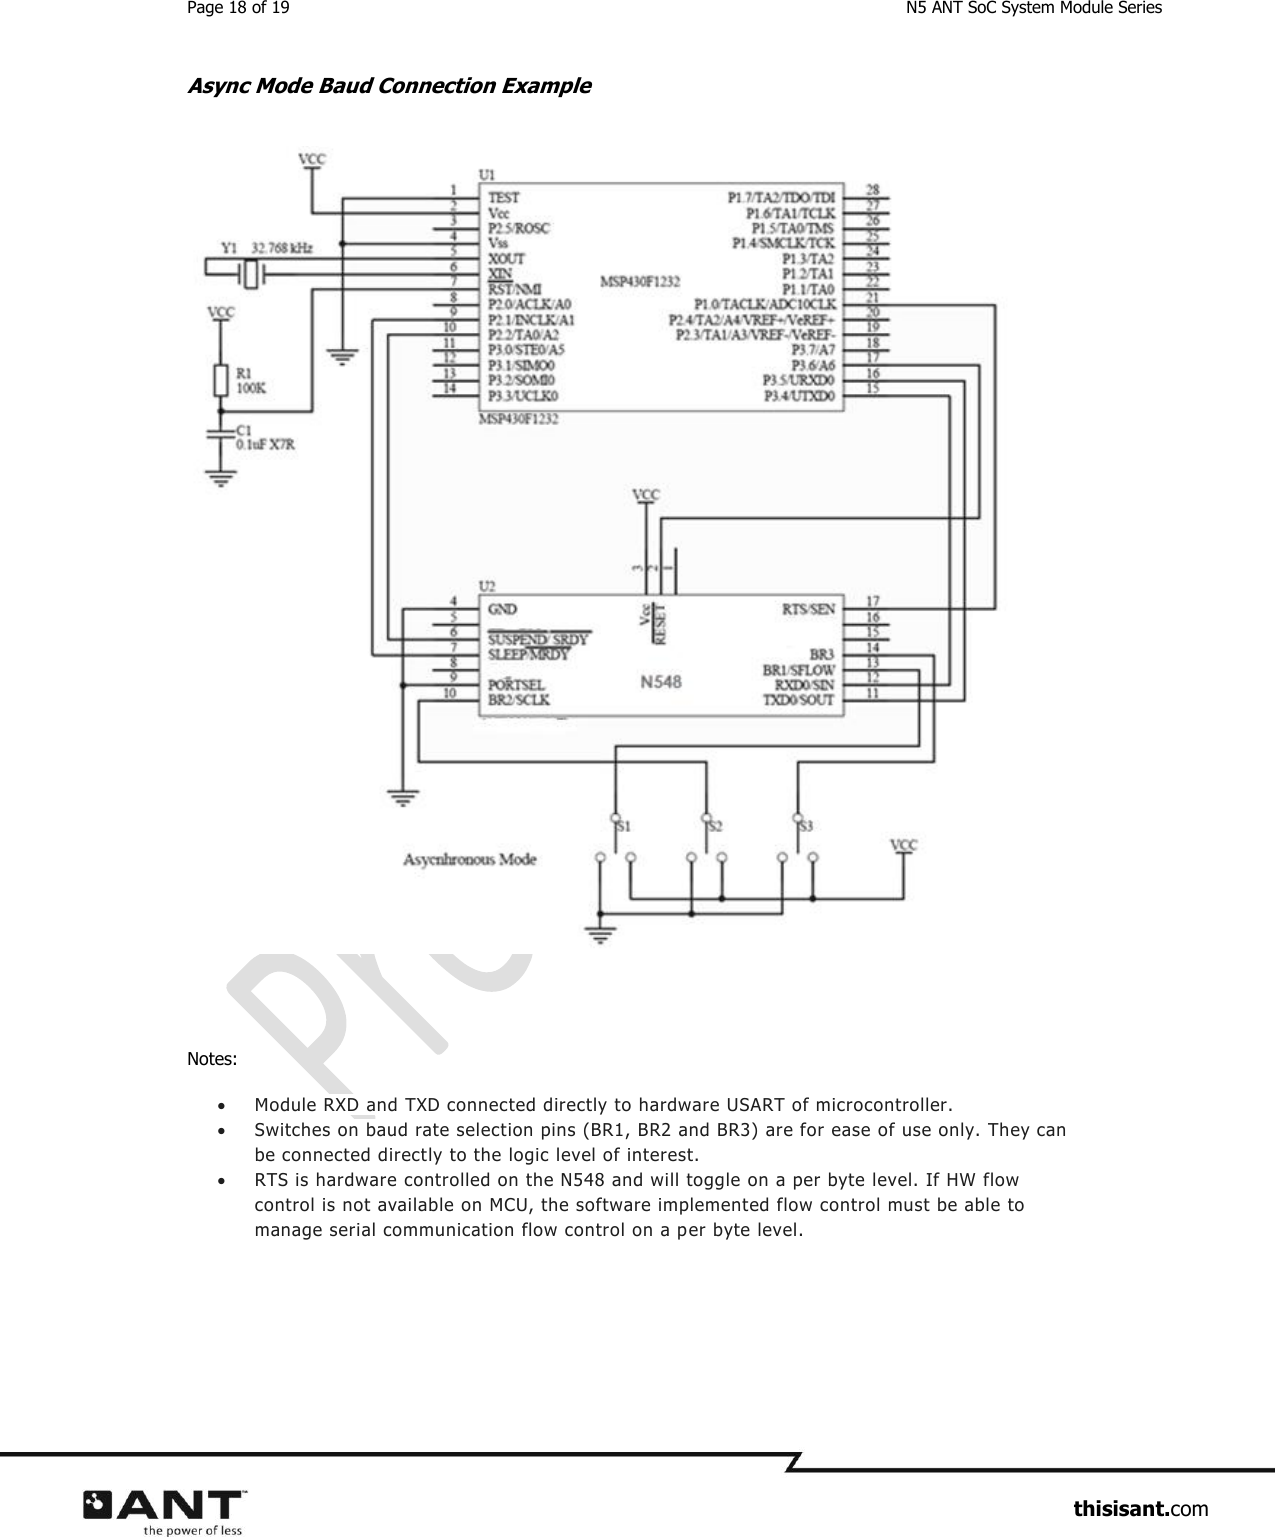 Page 18 of 19  N5 ANT SoC System Module Series                     thisisant.com Async Mode Baud Connection Example   Notes:  Module RXD and TXD connected directly to hardware USART of microcontroller.   Switches on baud rate selection pins (BR1, BR2 and BR3) are for ease of use only. They can be connected directly to the logic level of interest.  RTS is hardware controlled on the N548 and will toggle on a per byte level. If HW flow control is not available on MCU, the software implemented flow control must be able to manage serial communication flow control on a per byte level.   